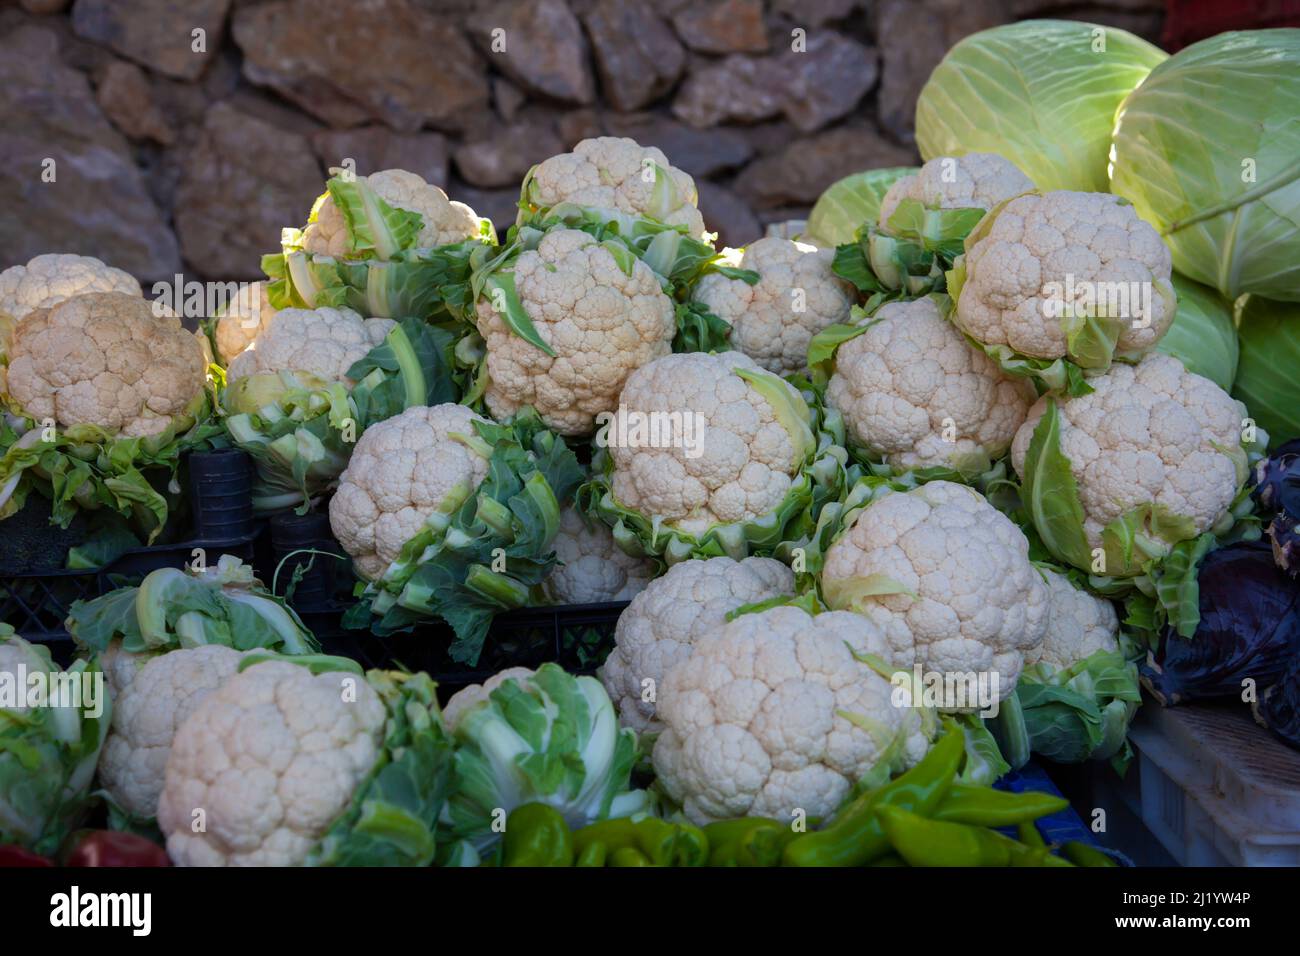 Cauliflower on display at a farmers market. Front view and close up. Stock Photo